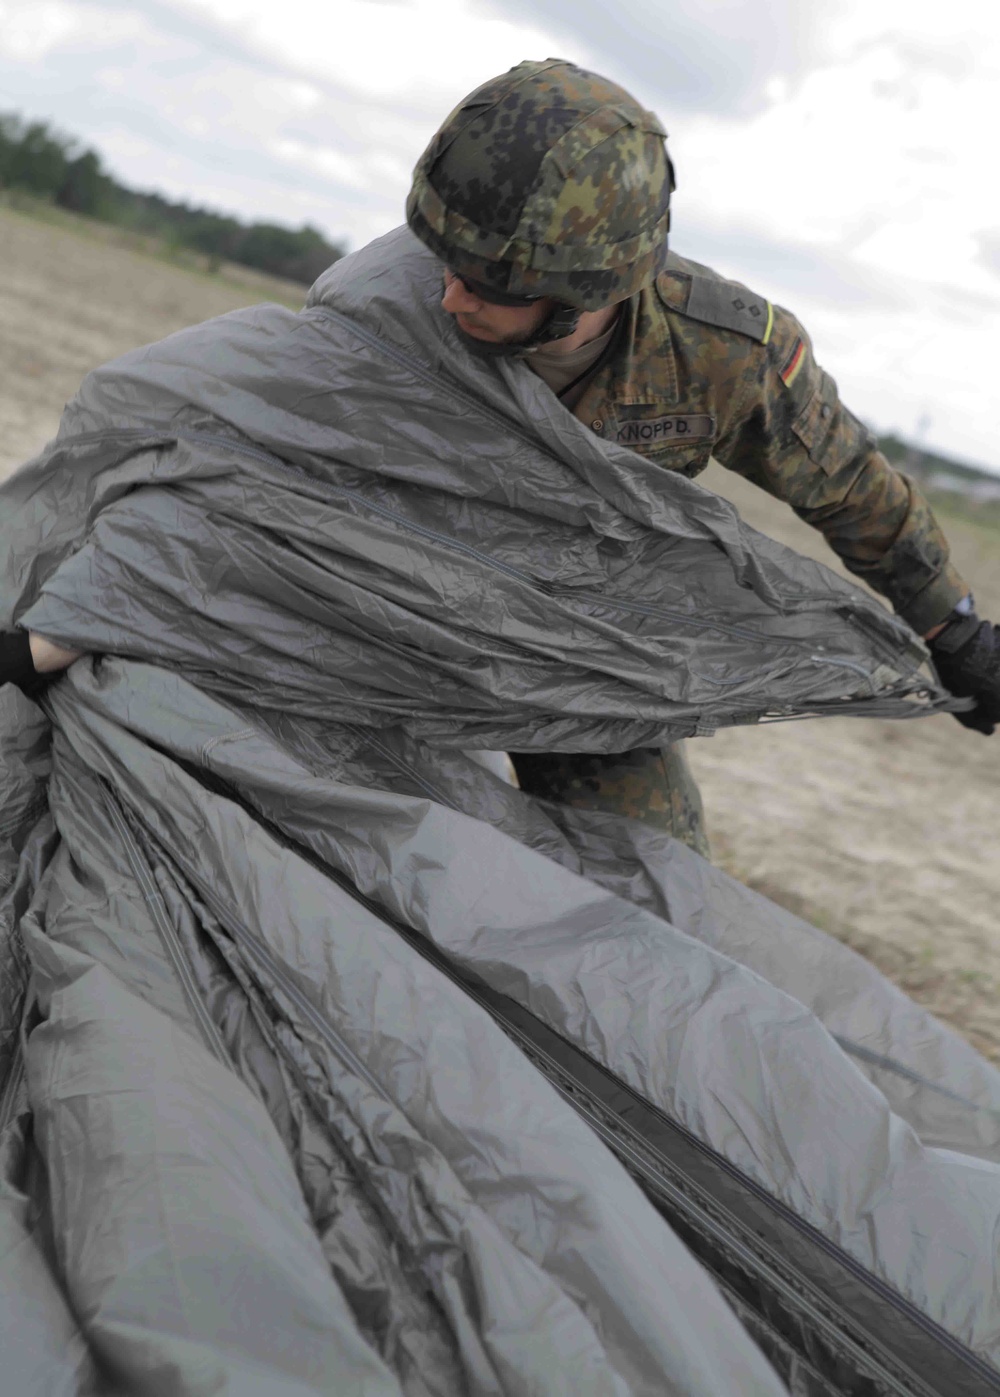 German soldier preps parachute for packing.